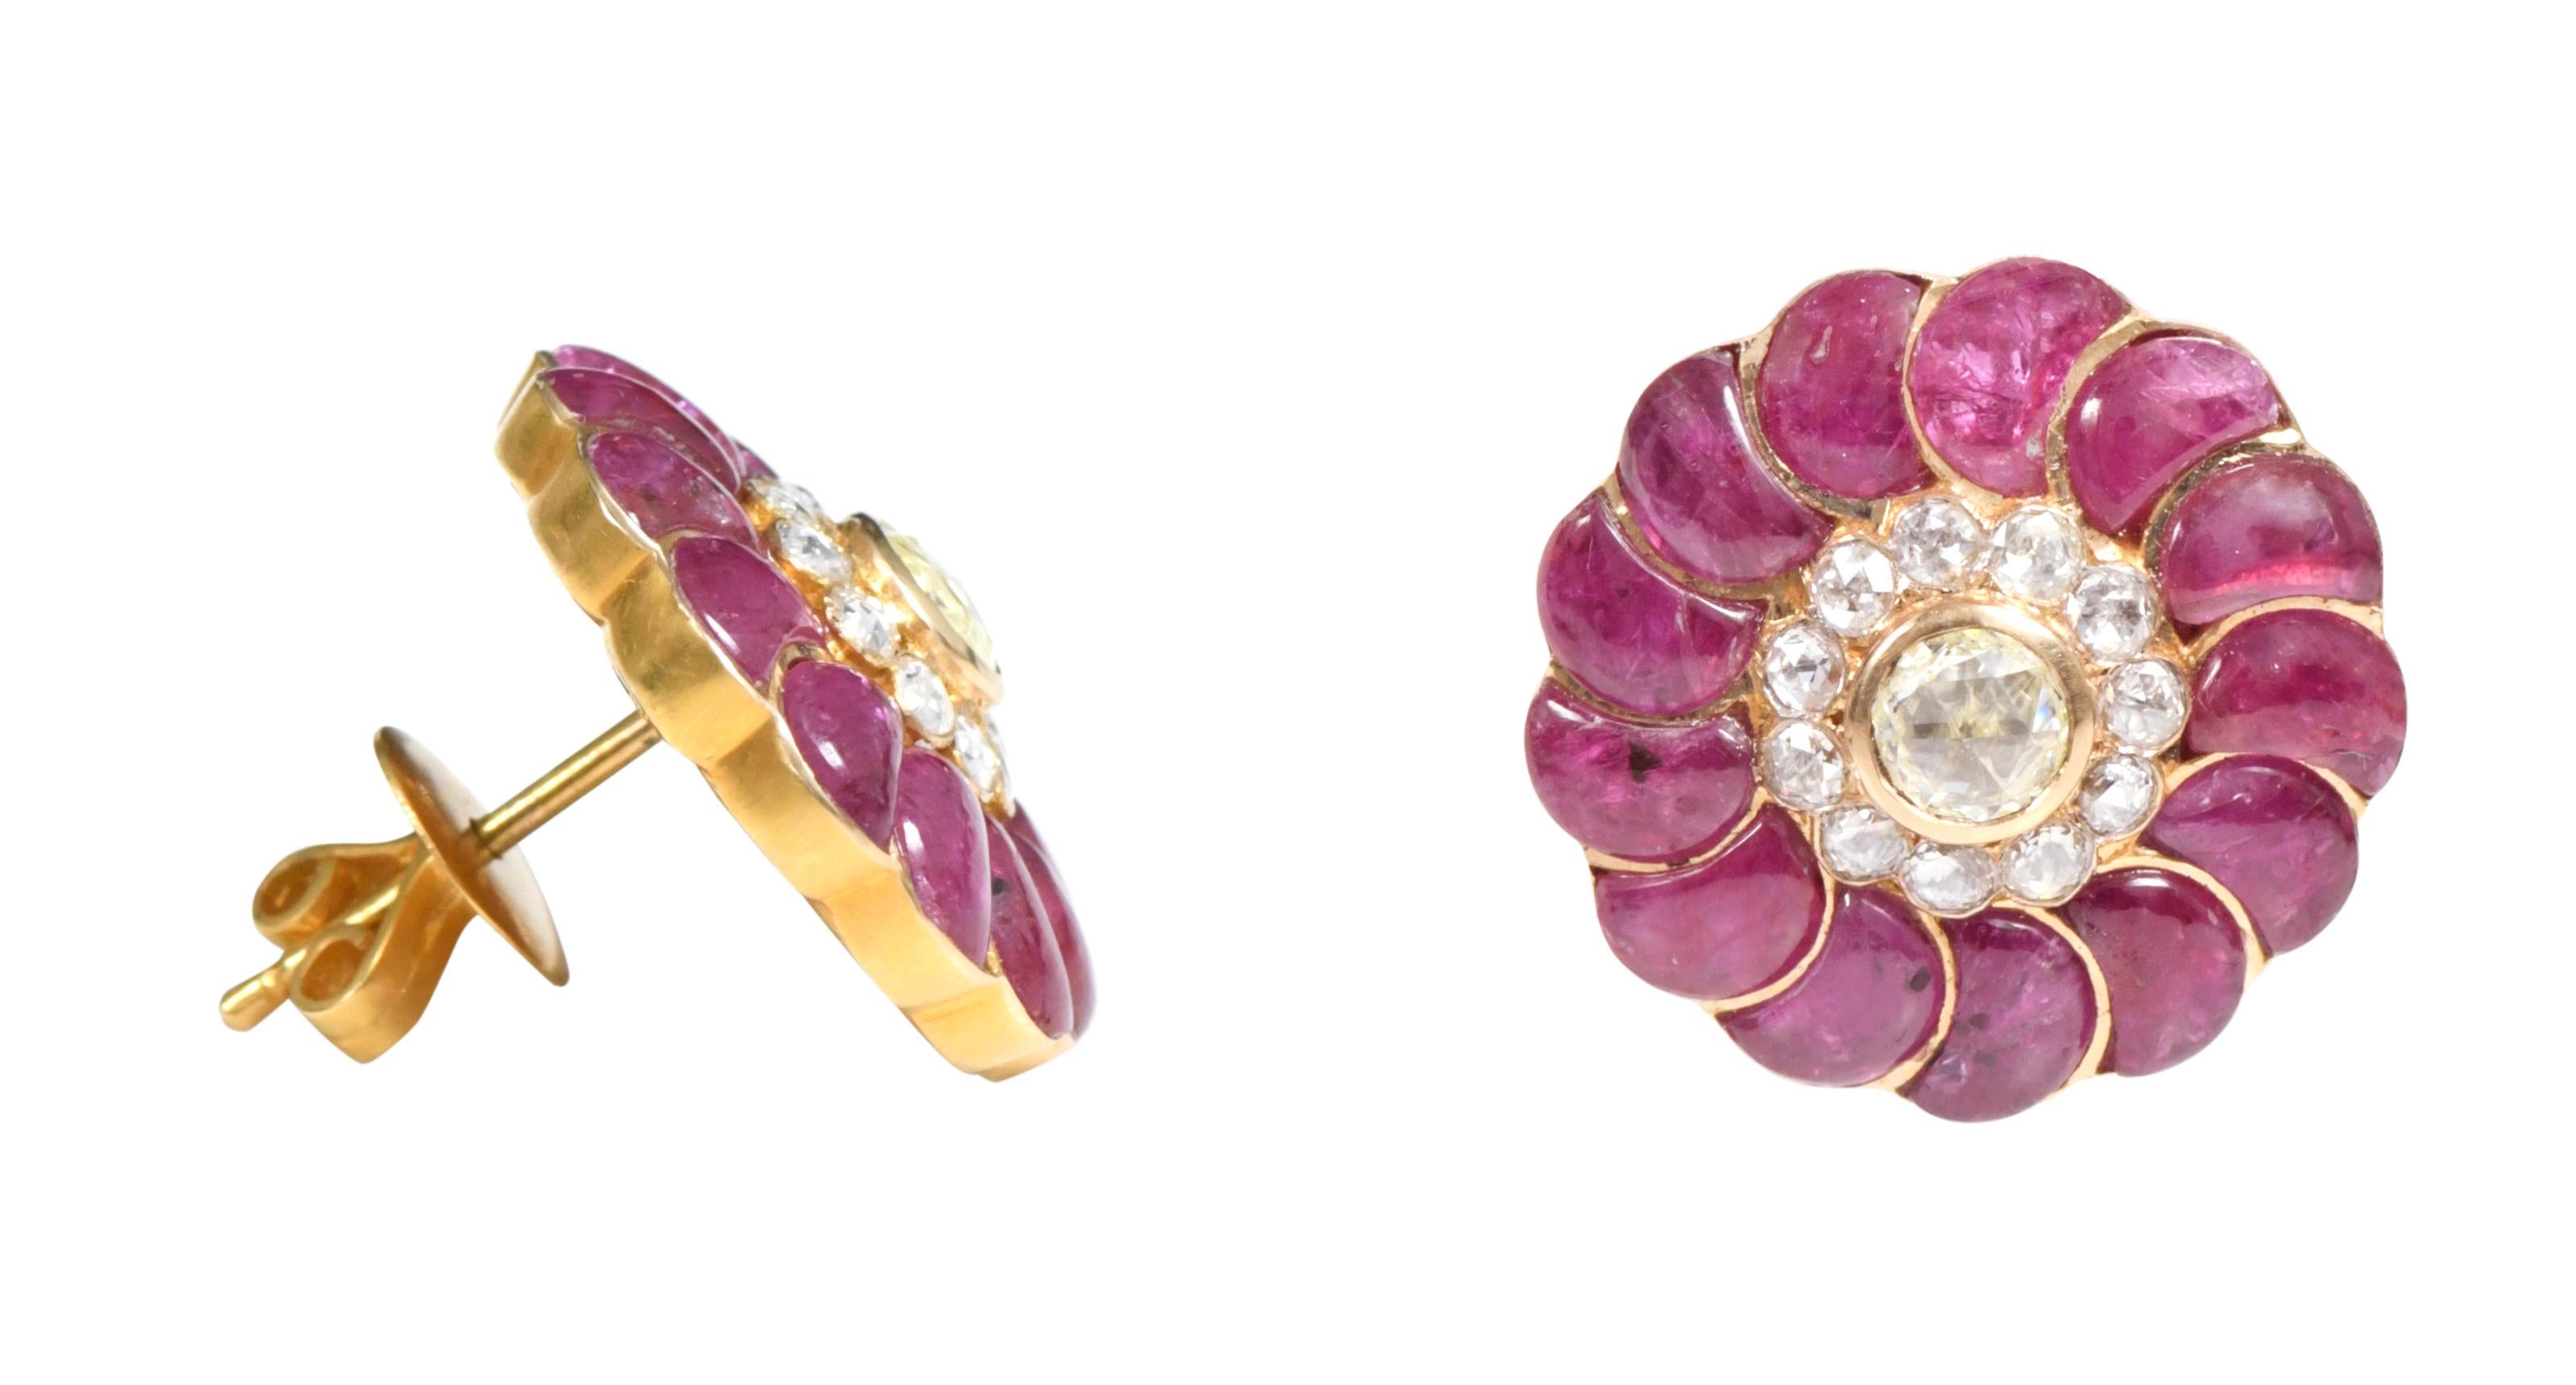 18 Karat Yellow Gold 13.73 Carat Ruby and Diamond Flower Stud Earrings

This magnificent crimson red ruby and rose cut solitaire diamond earring is an incredible feisty stylish design. The solitaire rose cut diamond in a yellow gold closed setting